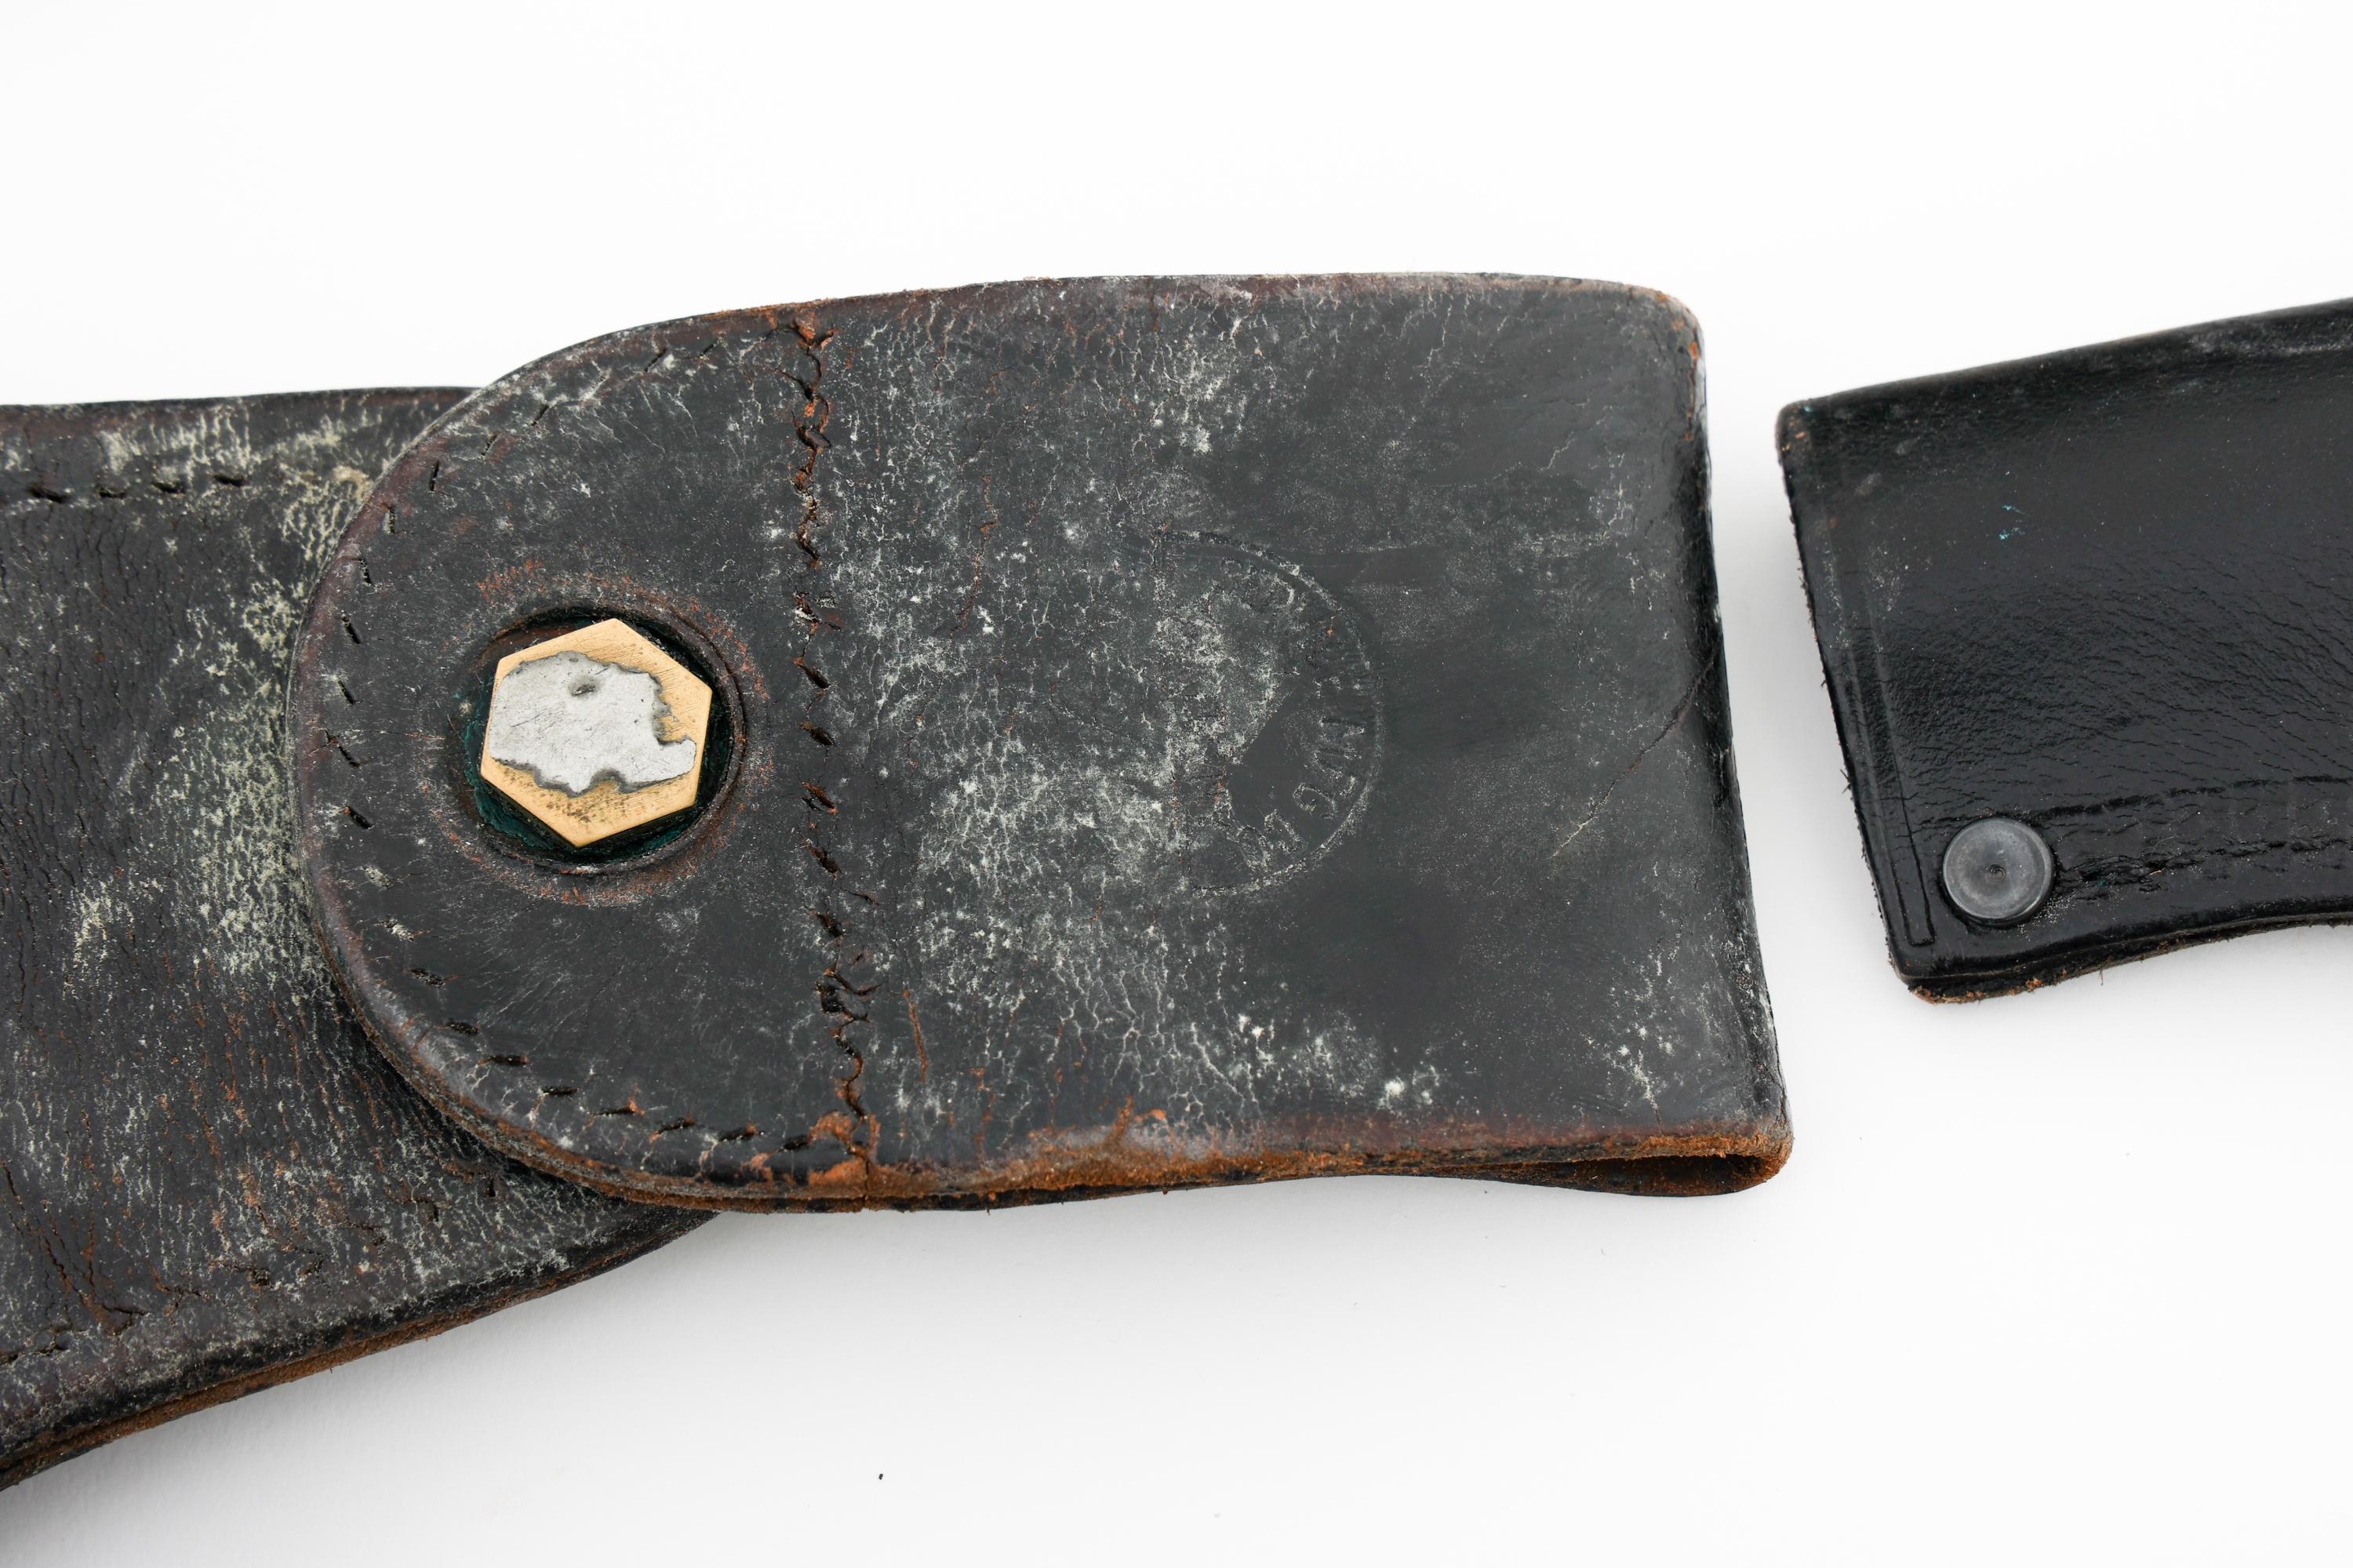 WWII - COLD WAR ERA US ARMED FORCES HOLSTERS